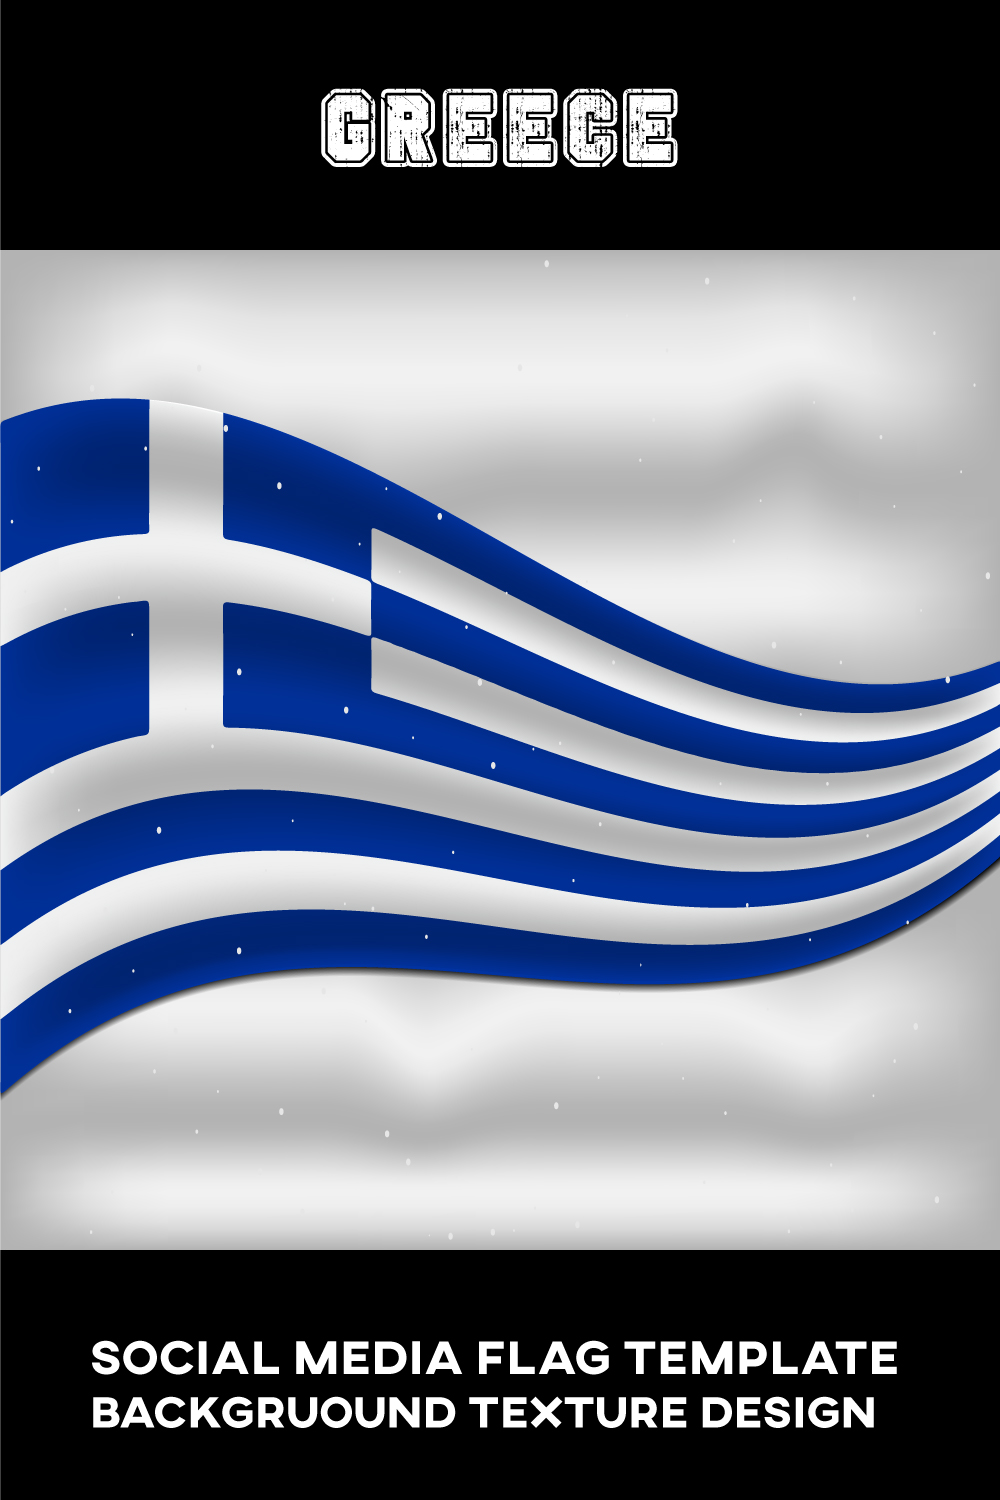 Exquisite image of the flag of Greece.